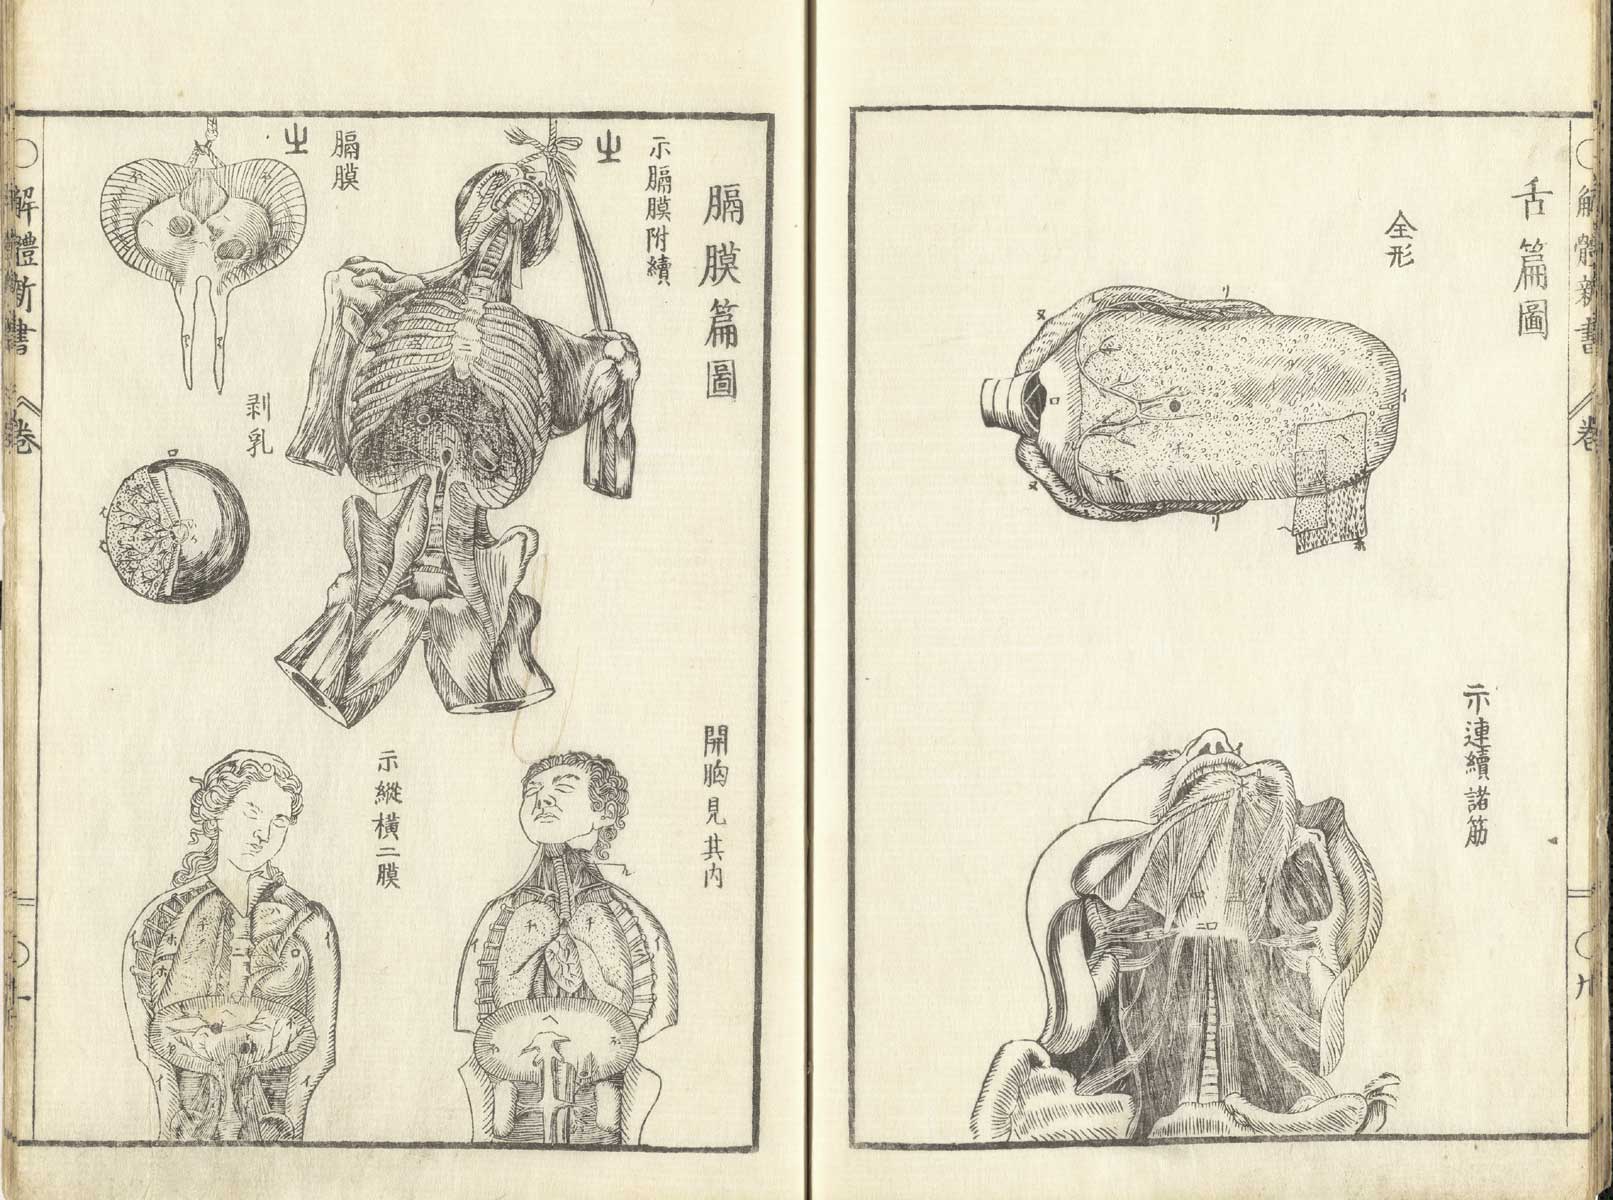 Pages 9 and 10 of Johann Adam Kulmus' Kaitai shinsho. Page 9 are an illustration of the tongue and a flayed view of the skin area. Page 10 are several illustrations of the flayed male and female corpses displaying the thoracic cavity.